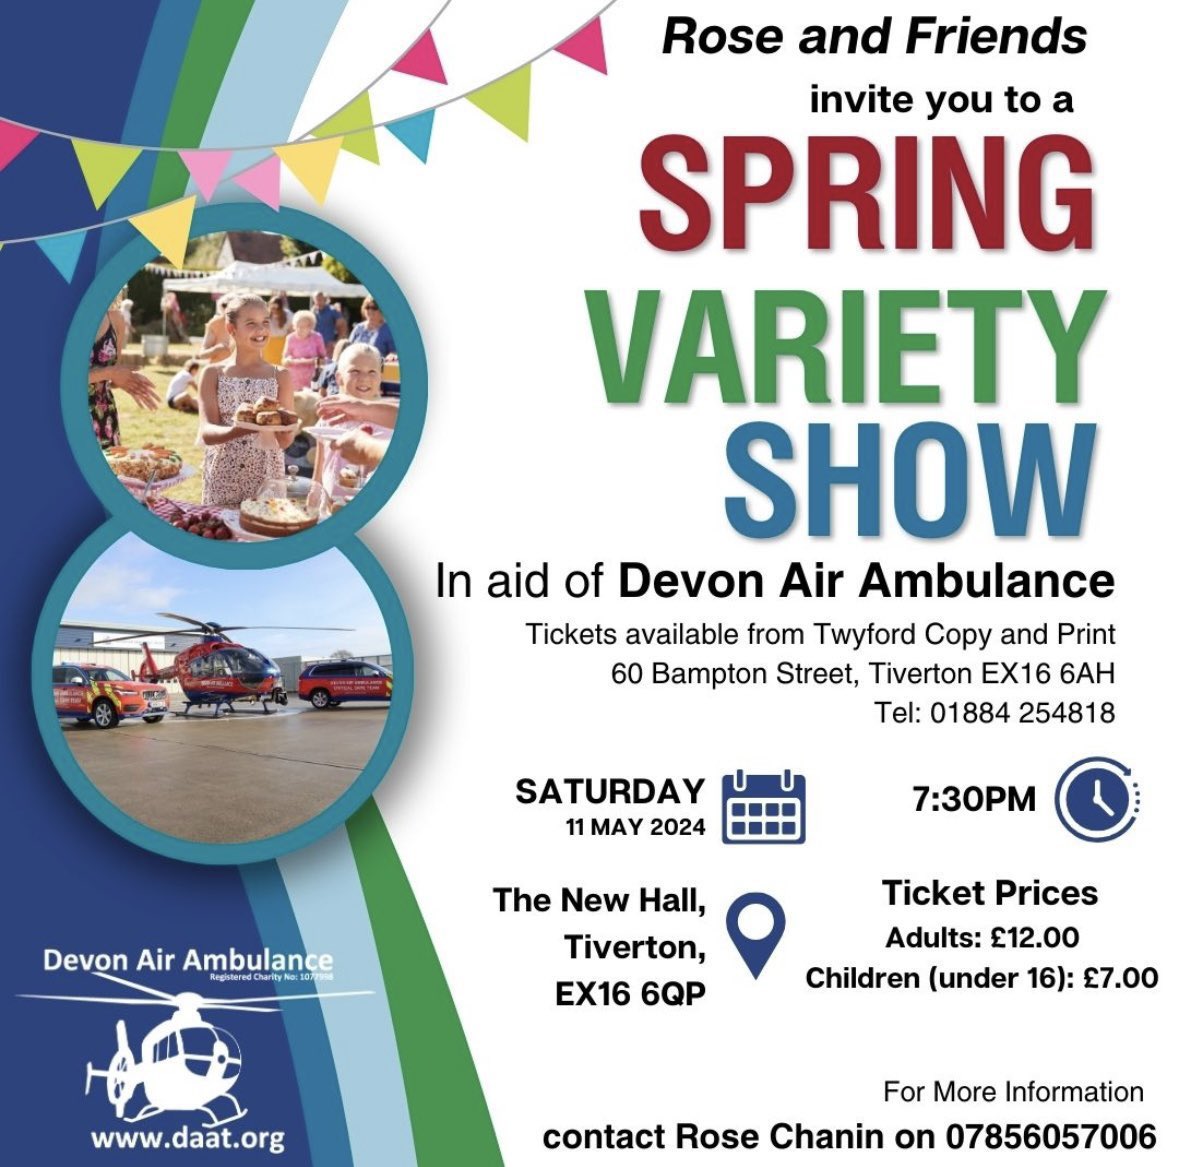 Save the date for the amazing Spring Variety Show hosted by Rose and Friends in aid of Devon Air Ambulance on Saturday 11th May! Both adults and children are invited to experience the wonderful dance, music and specialist acts that will be performing!